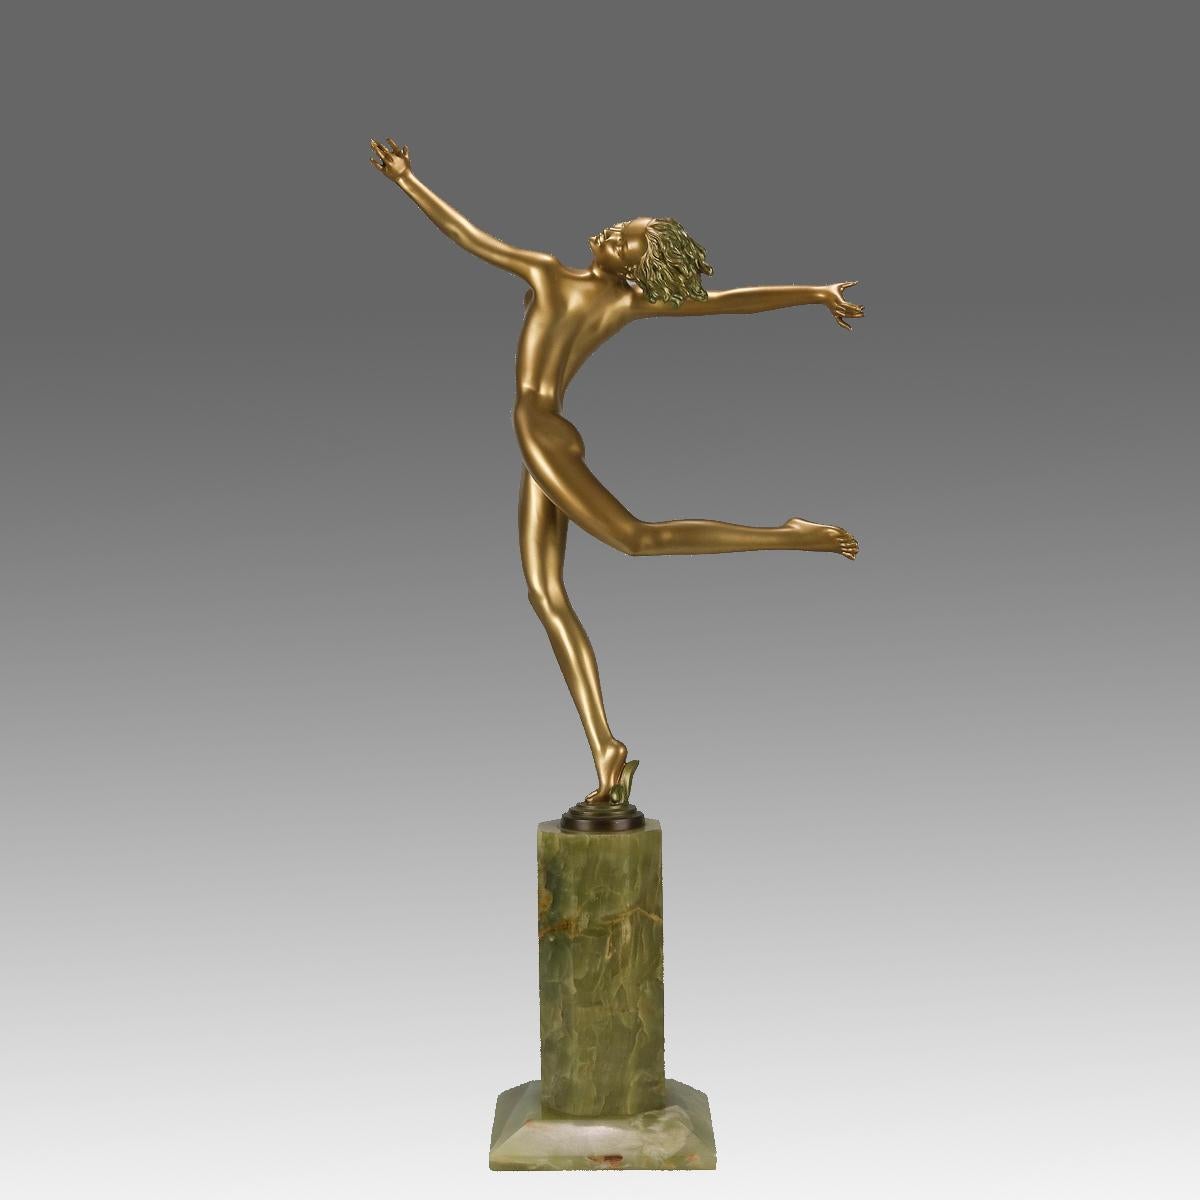 An exhilarating early 20th Century Art Deco cold painted gilt bronze figure of a dancer in an energetic pose with excellent colours and very fine surface detail, raised on a tall Brazilian green onyx base and signed Lorenzl 

ADDITIONAL